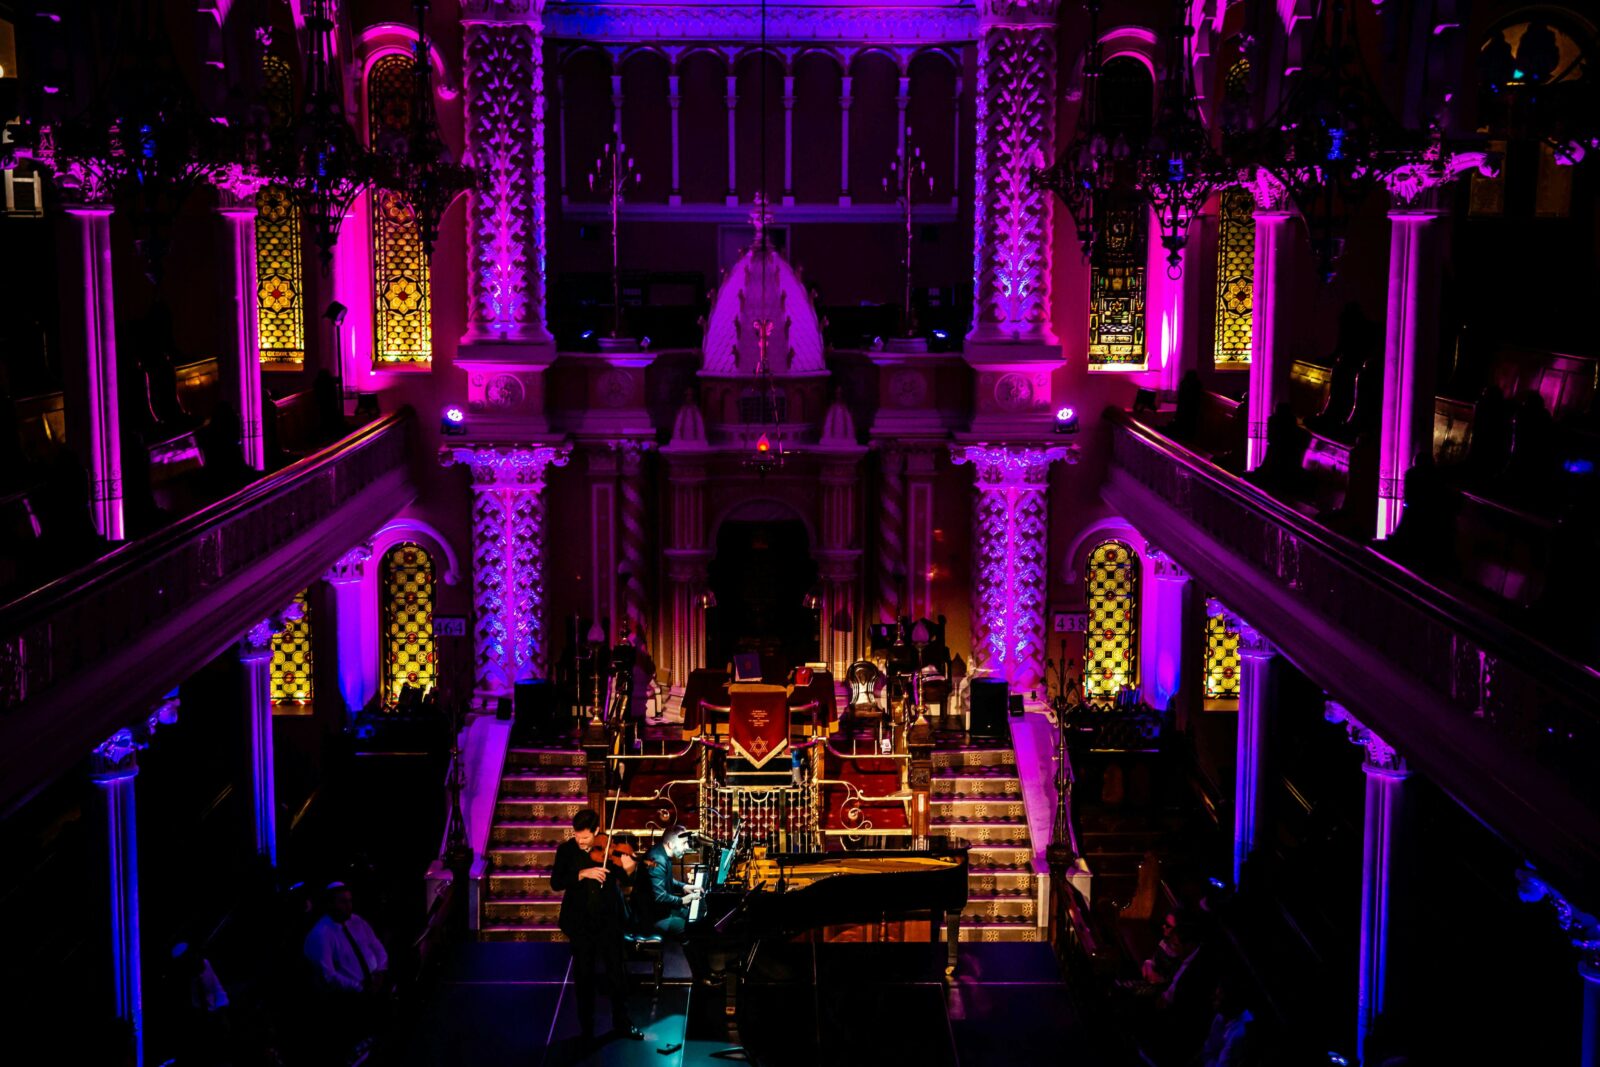 A concert at the great Synagogue with pink and purple lighting and a gran piano with a violinist